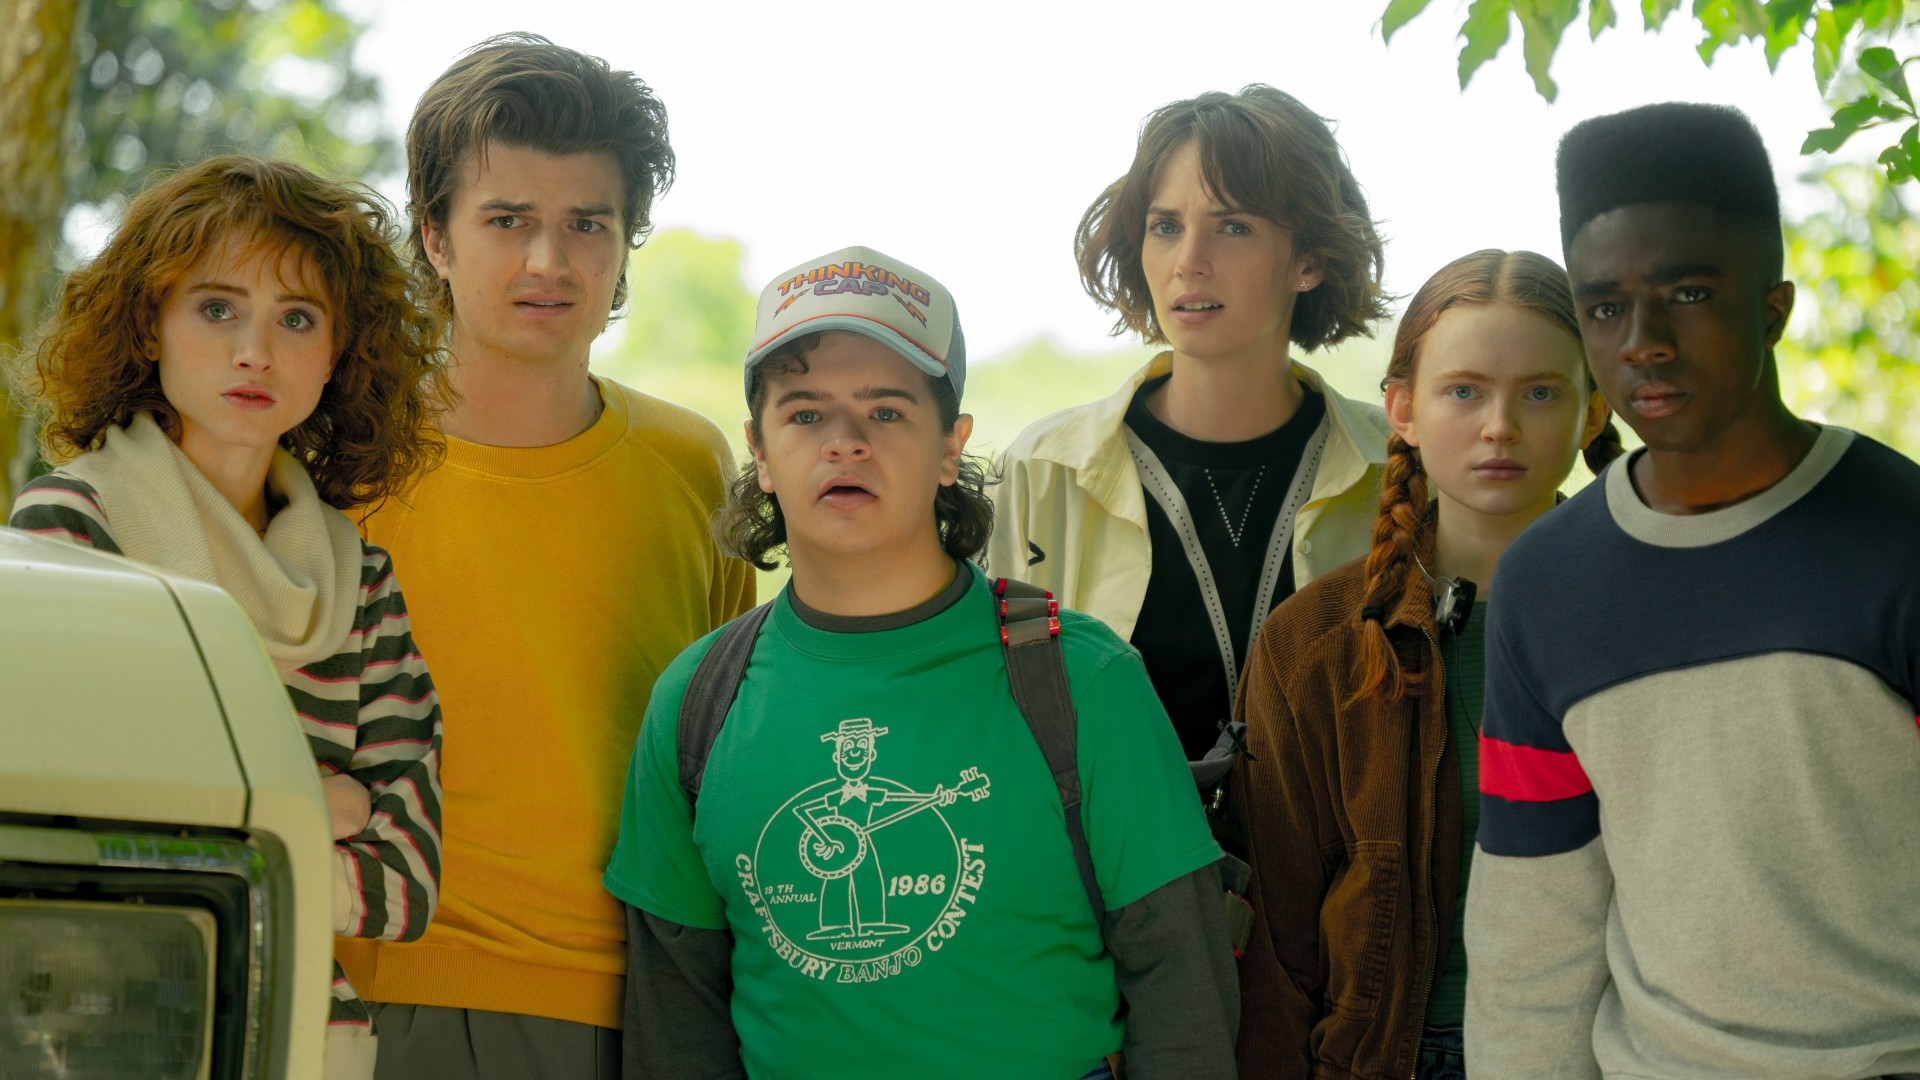 Every question you have about Stranger Things season 4, answered